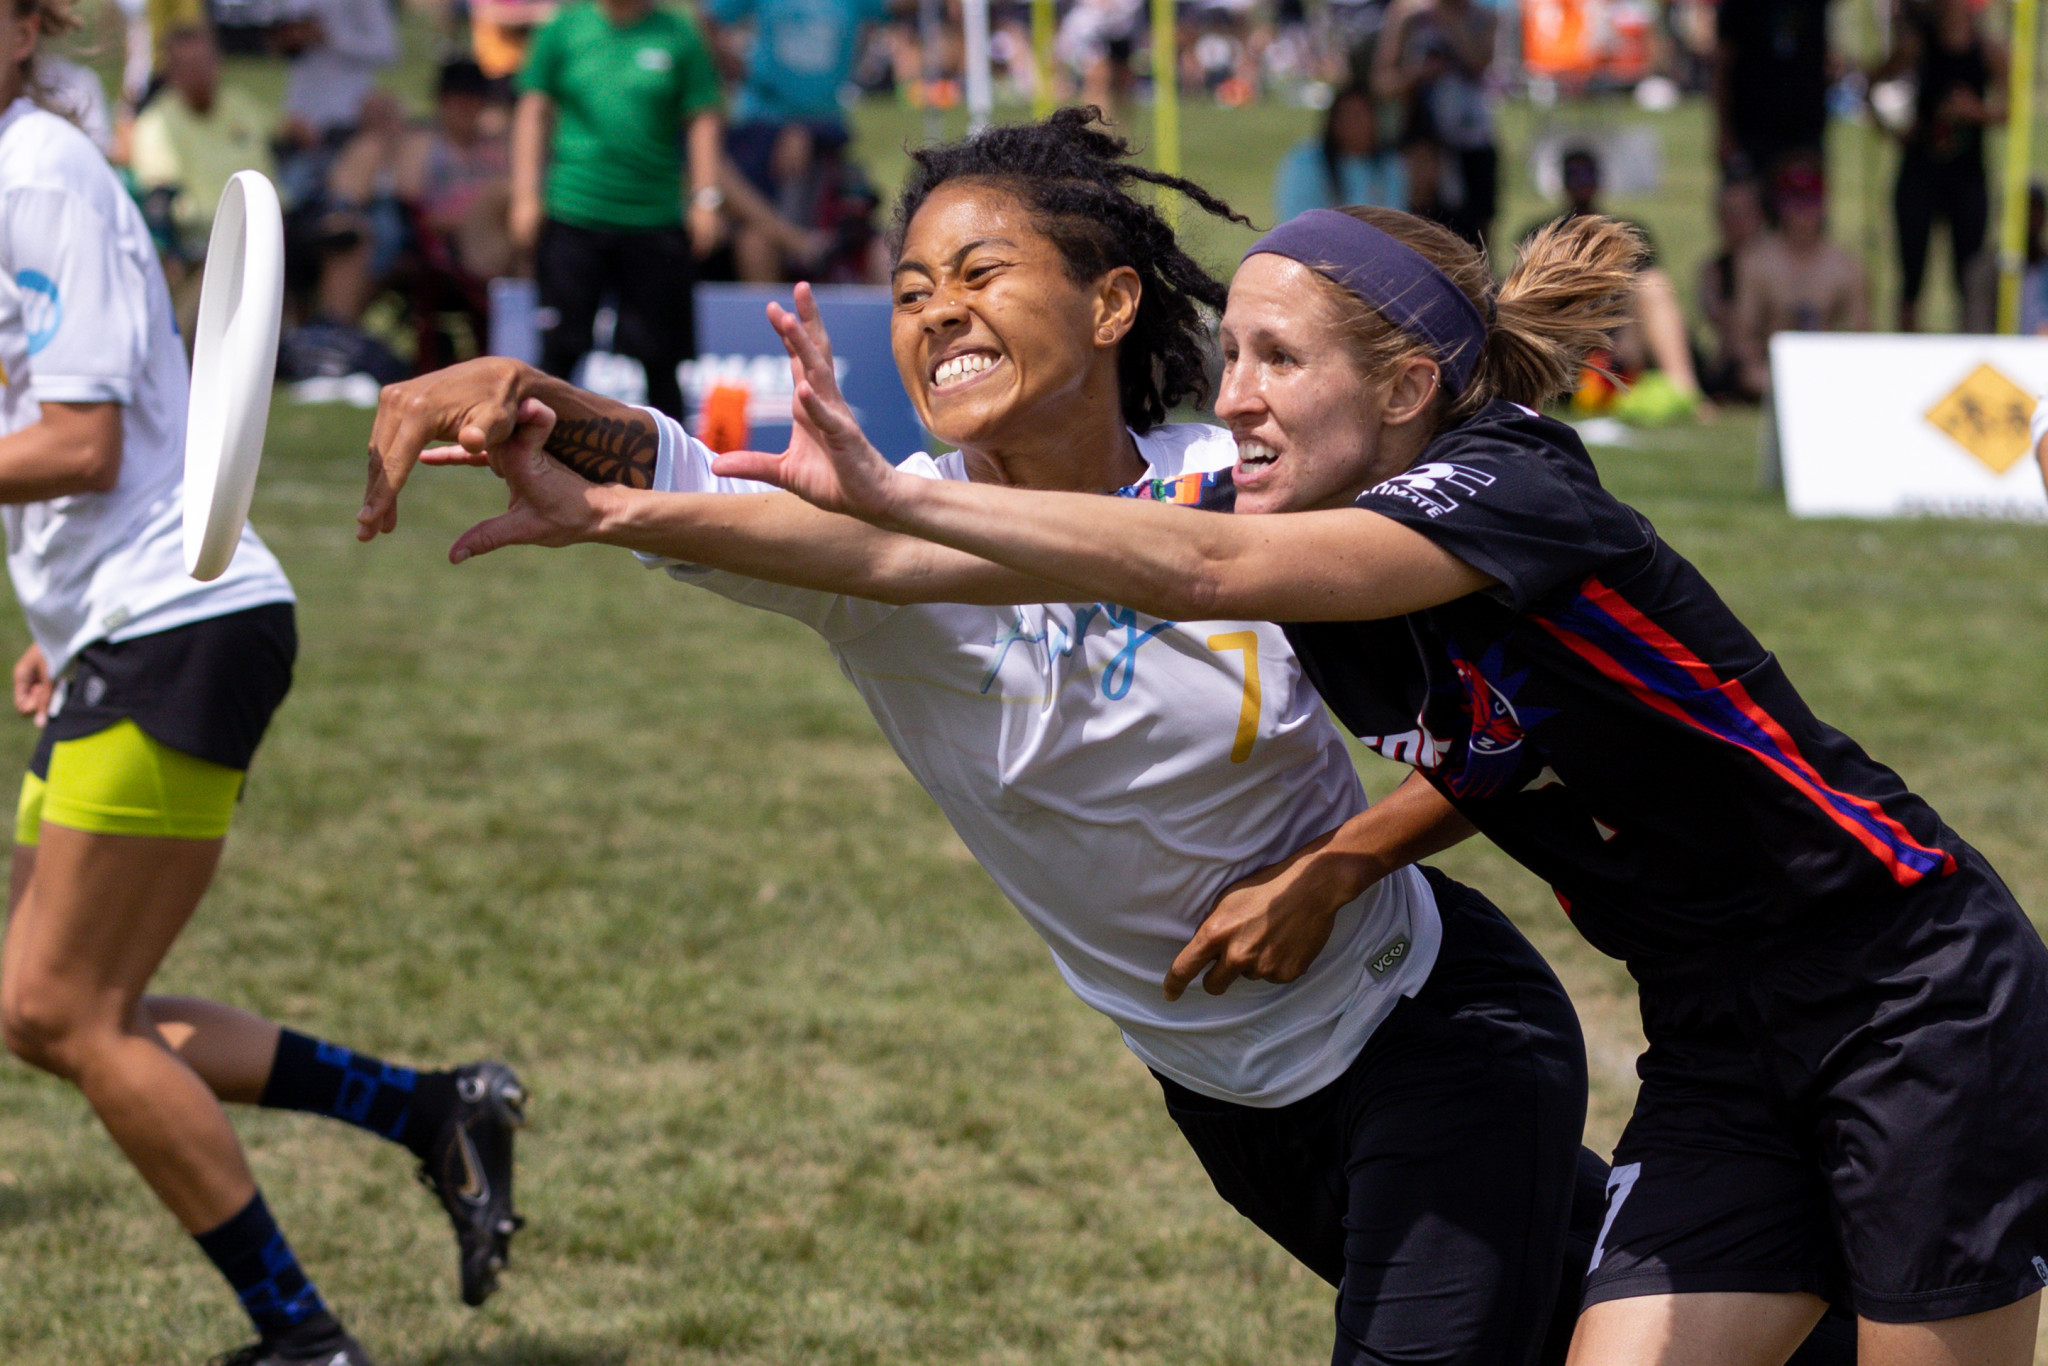 Fury's Octavia Payne, left, and Raleigh Phoenix's Kami Groom, right, battled during an all-American semi-final tie in the women's division ©Paul Rutherford for UltiPhotos